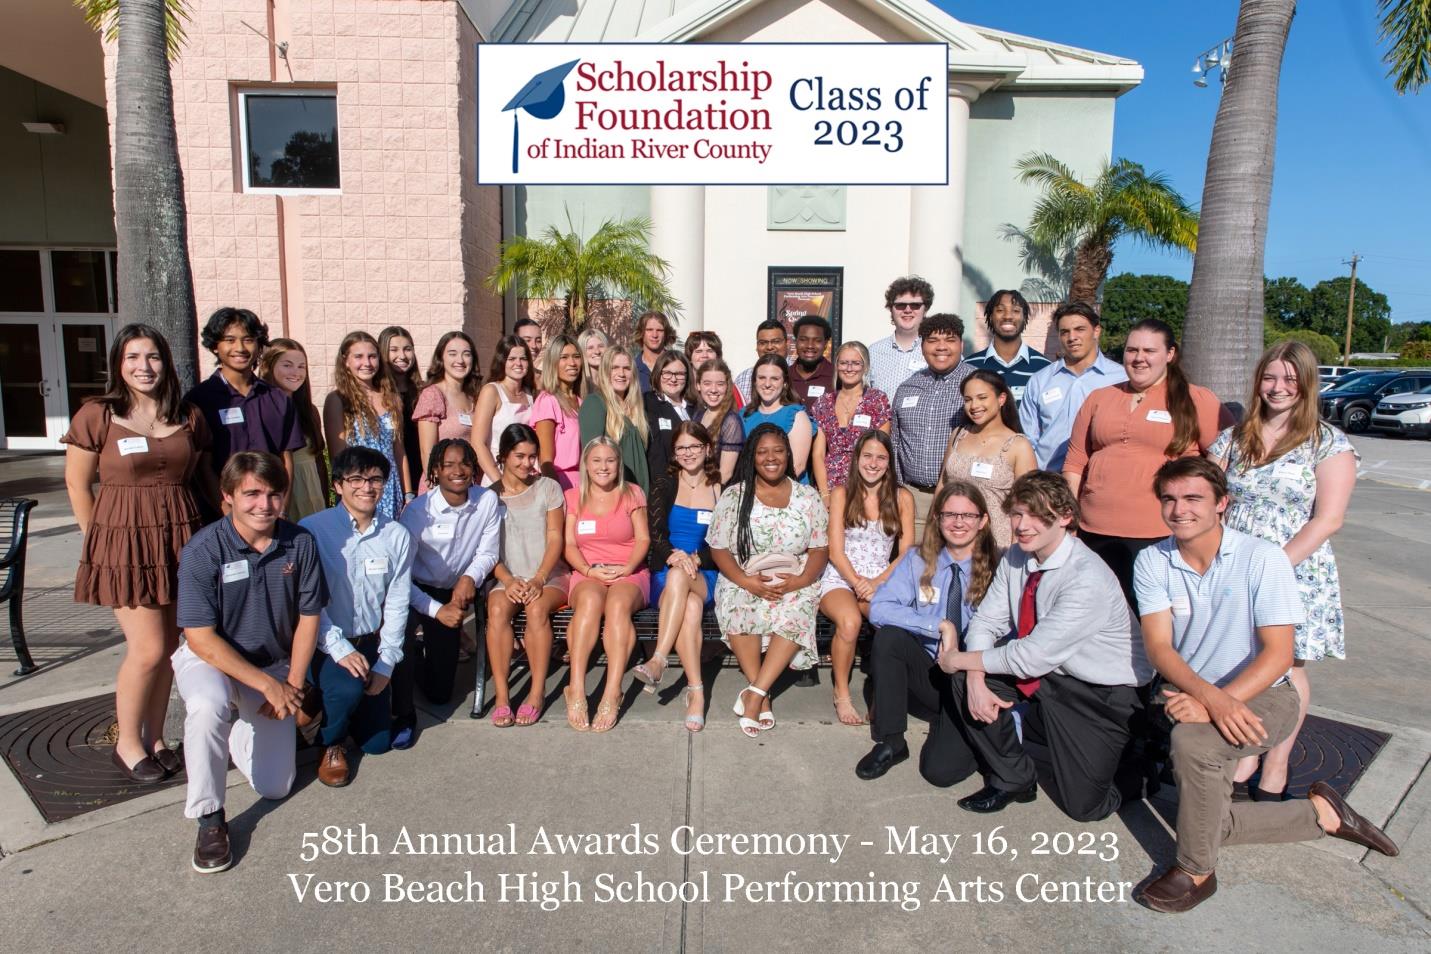 Scholarship Foundation of Indian River County Awards $725,400 to 37 Students